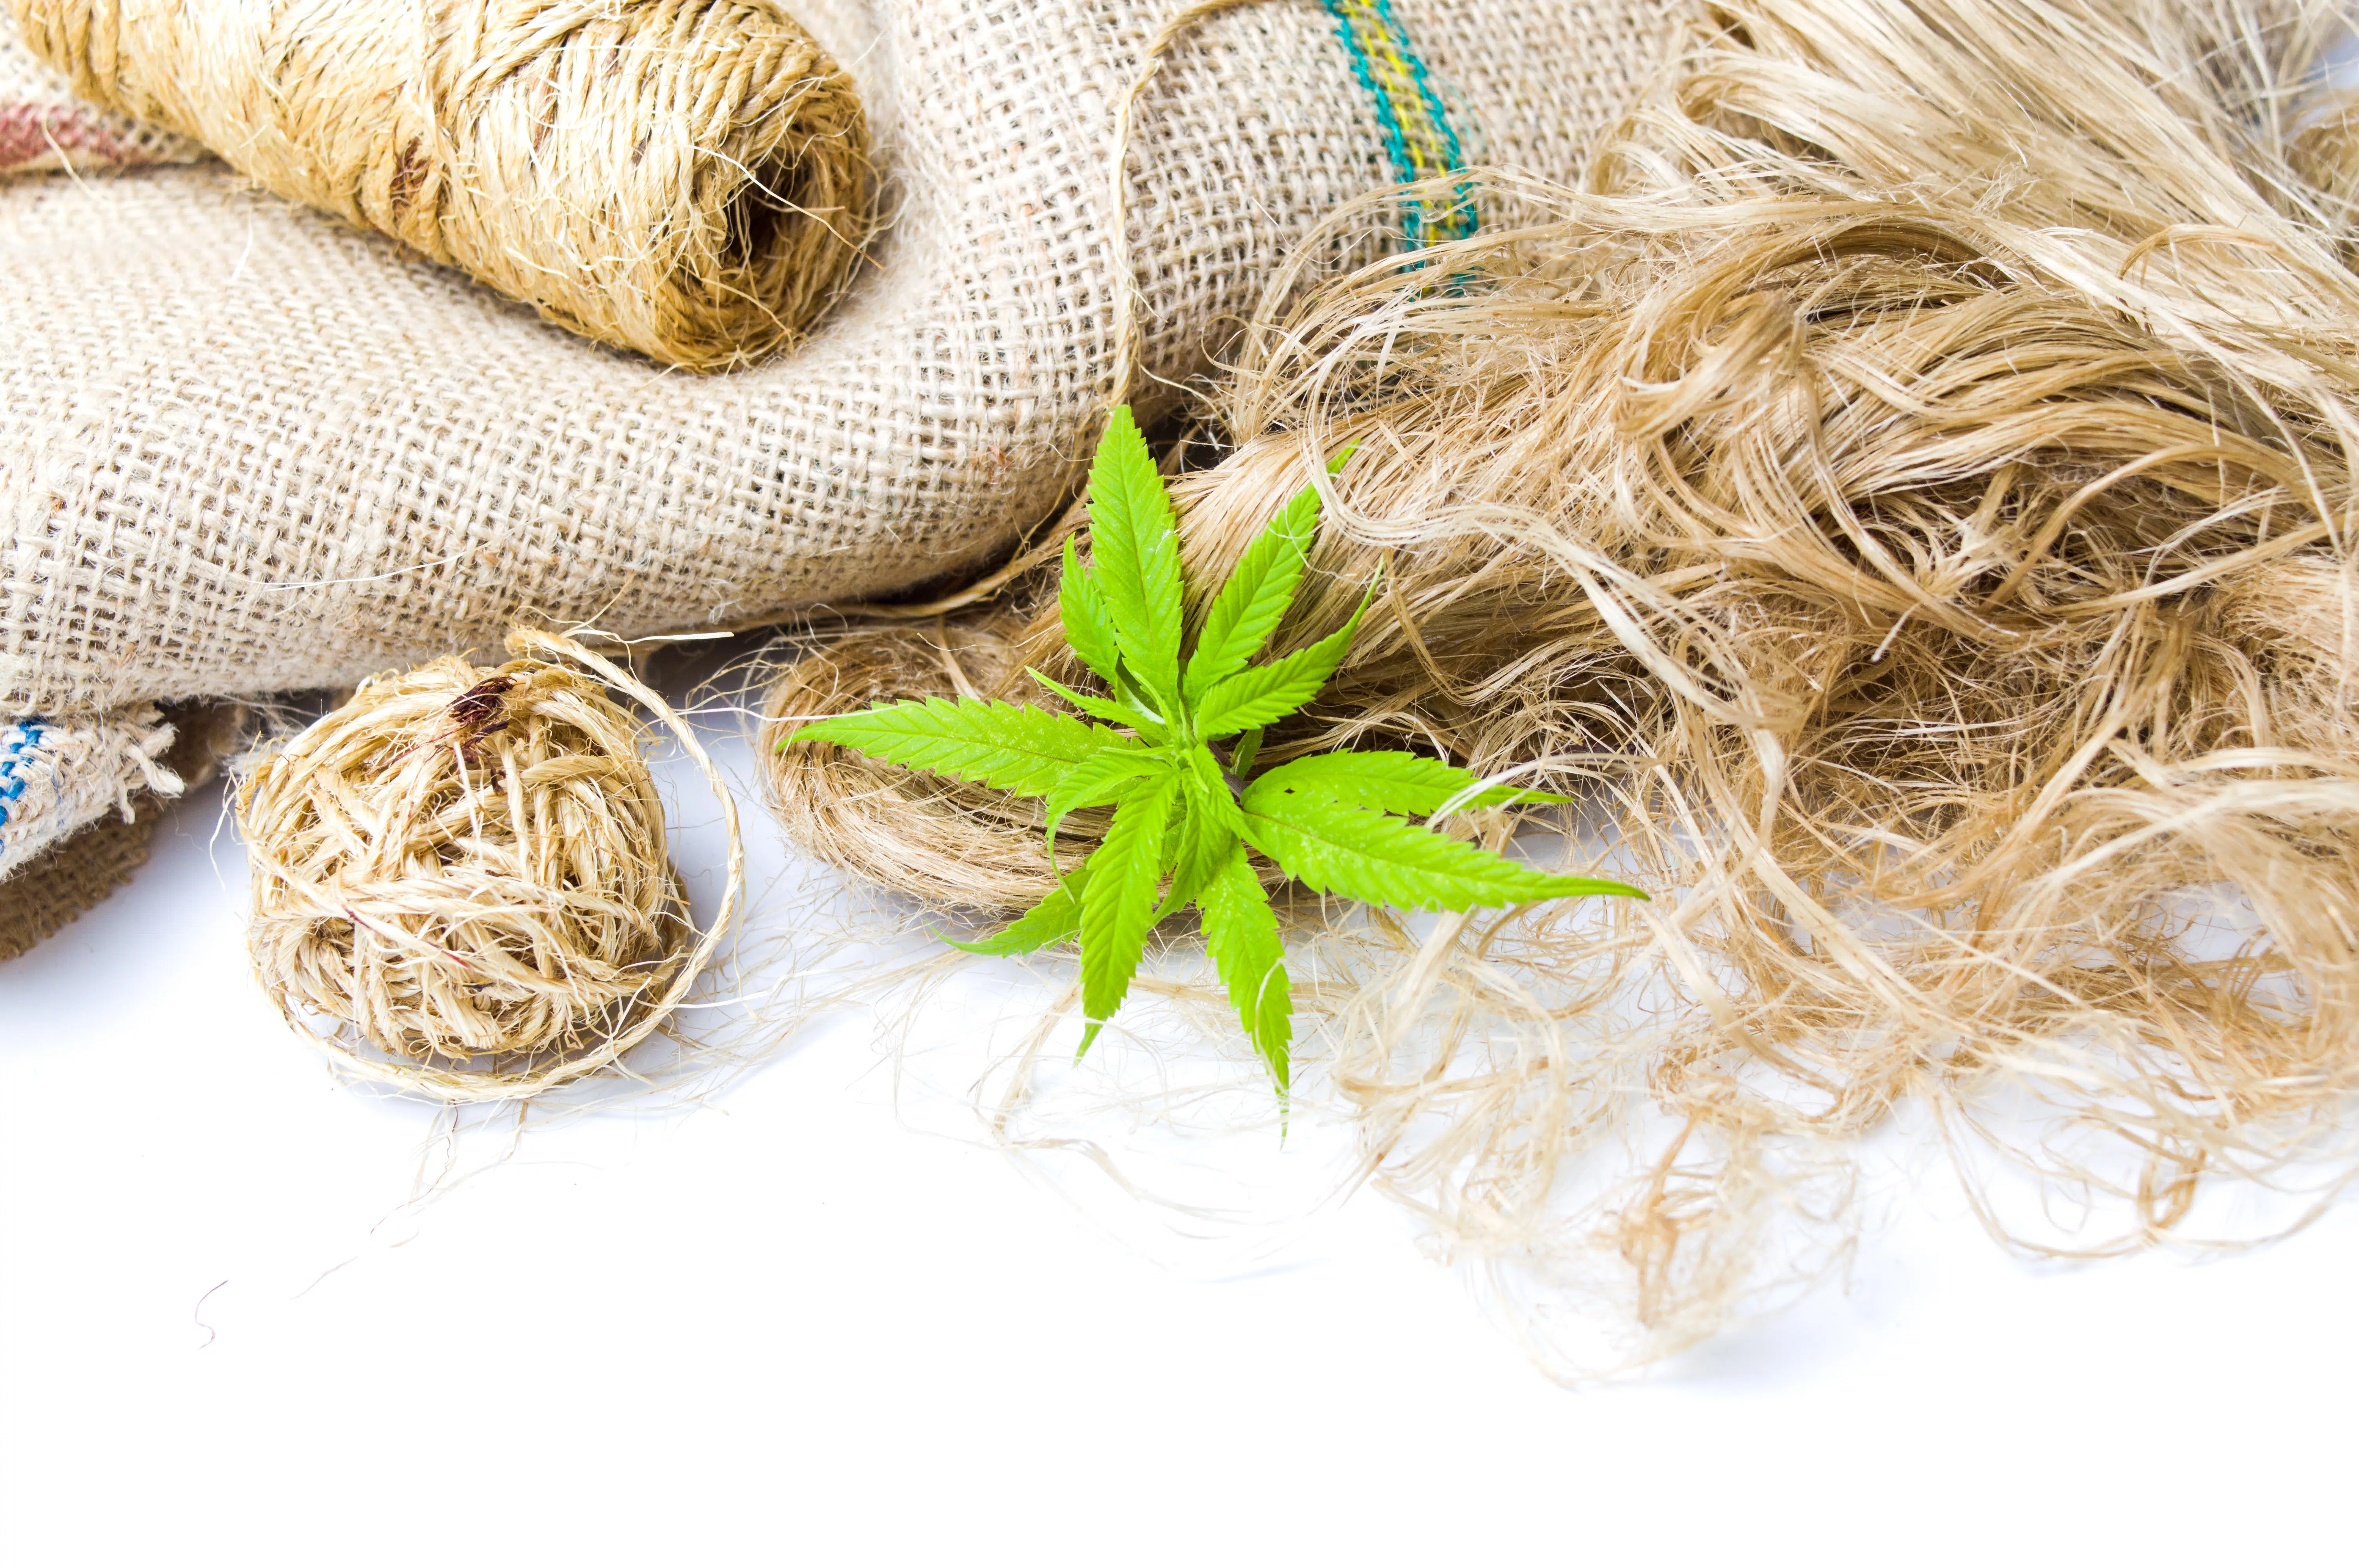 Hemp Stalks are the basis of a plethora of hemp products